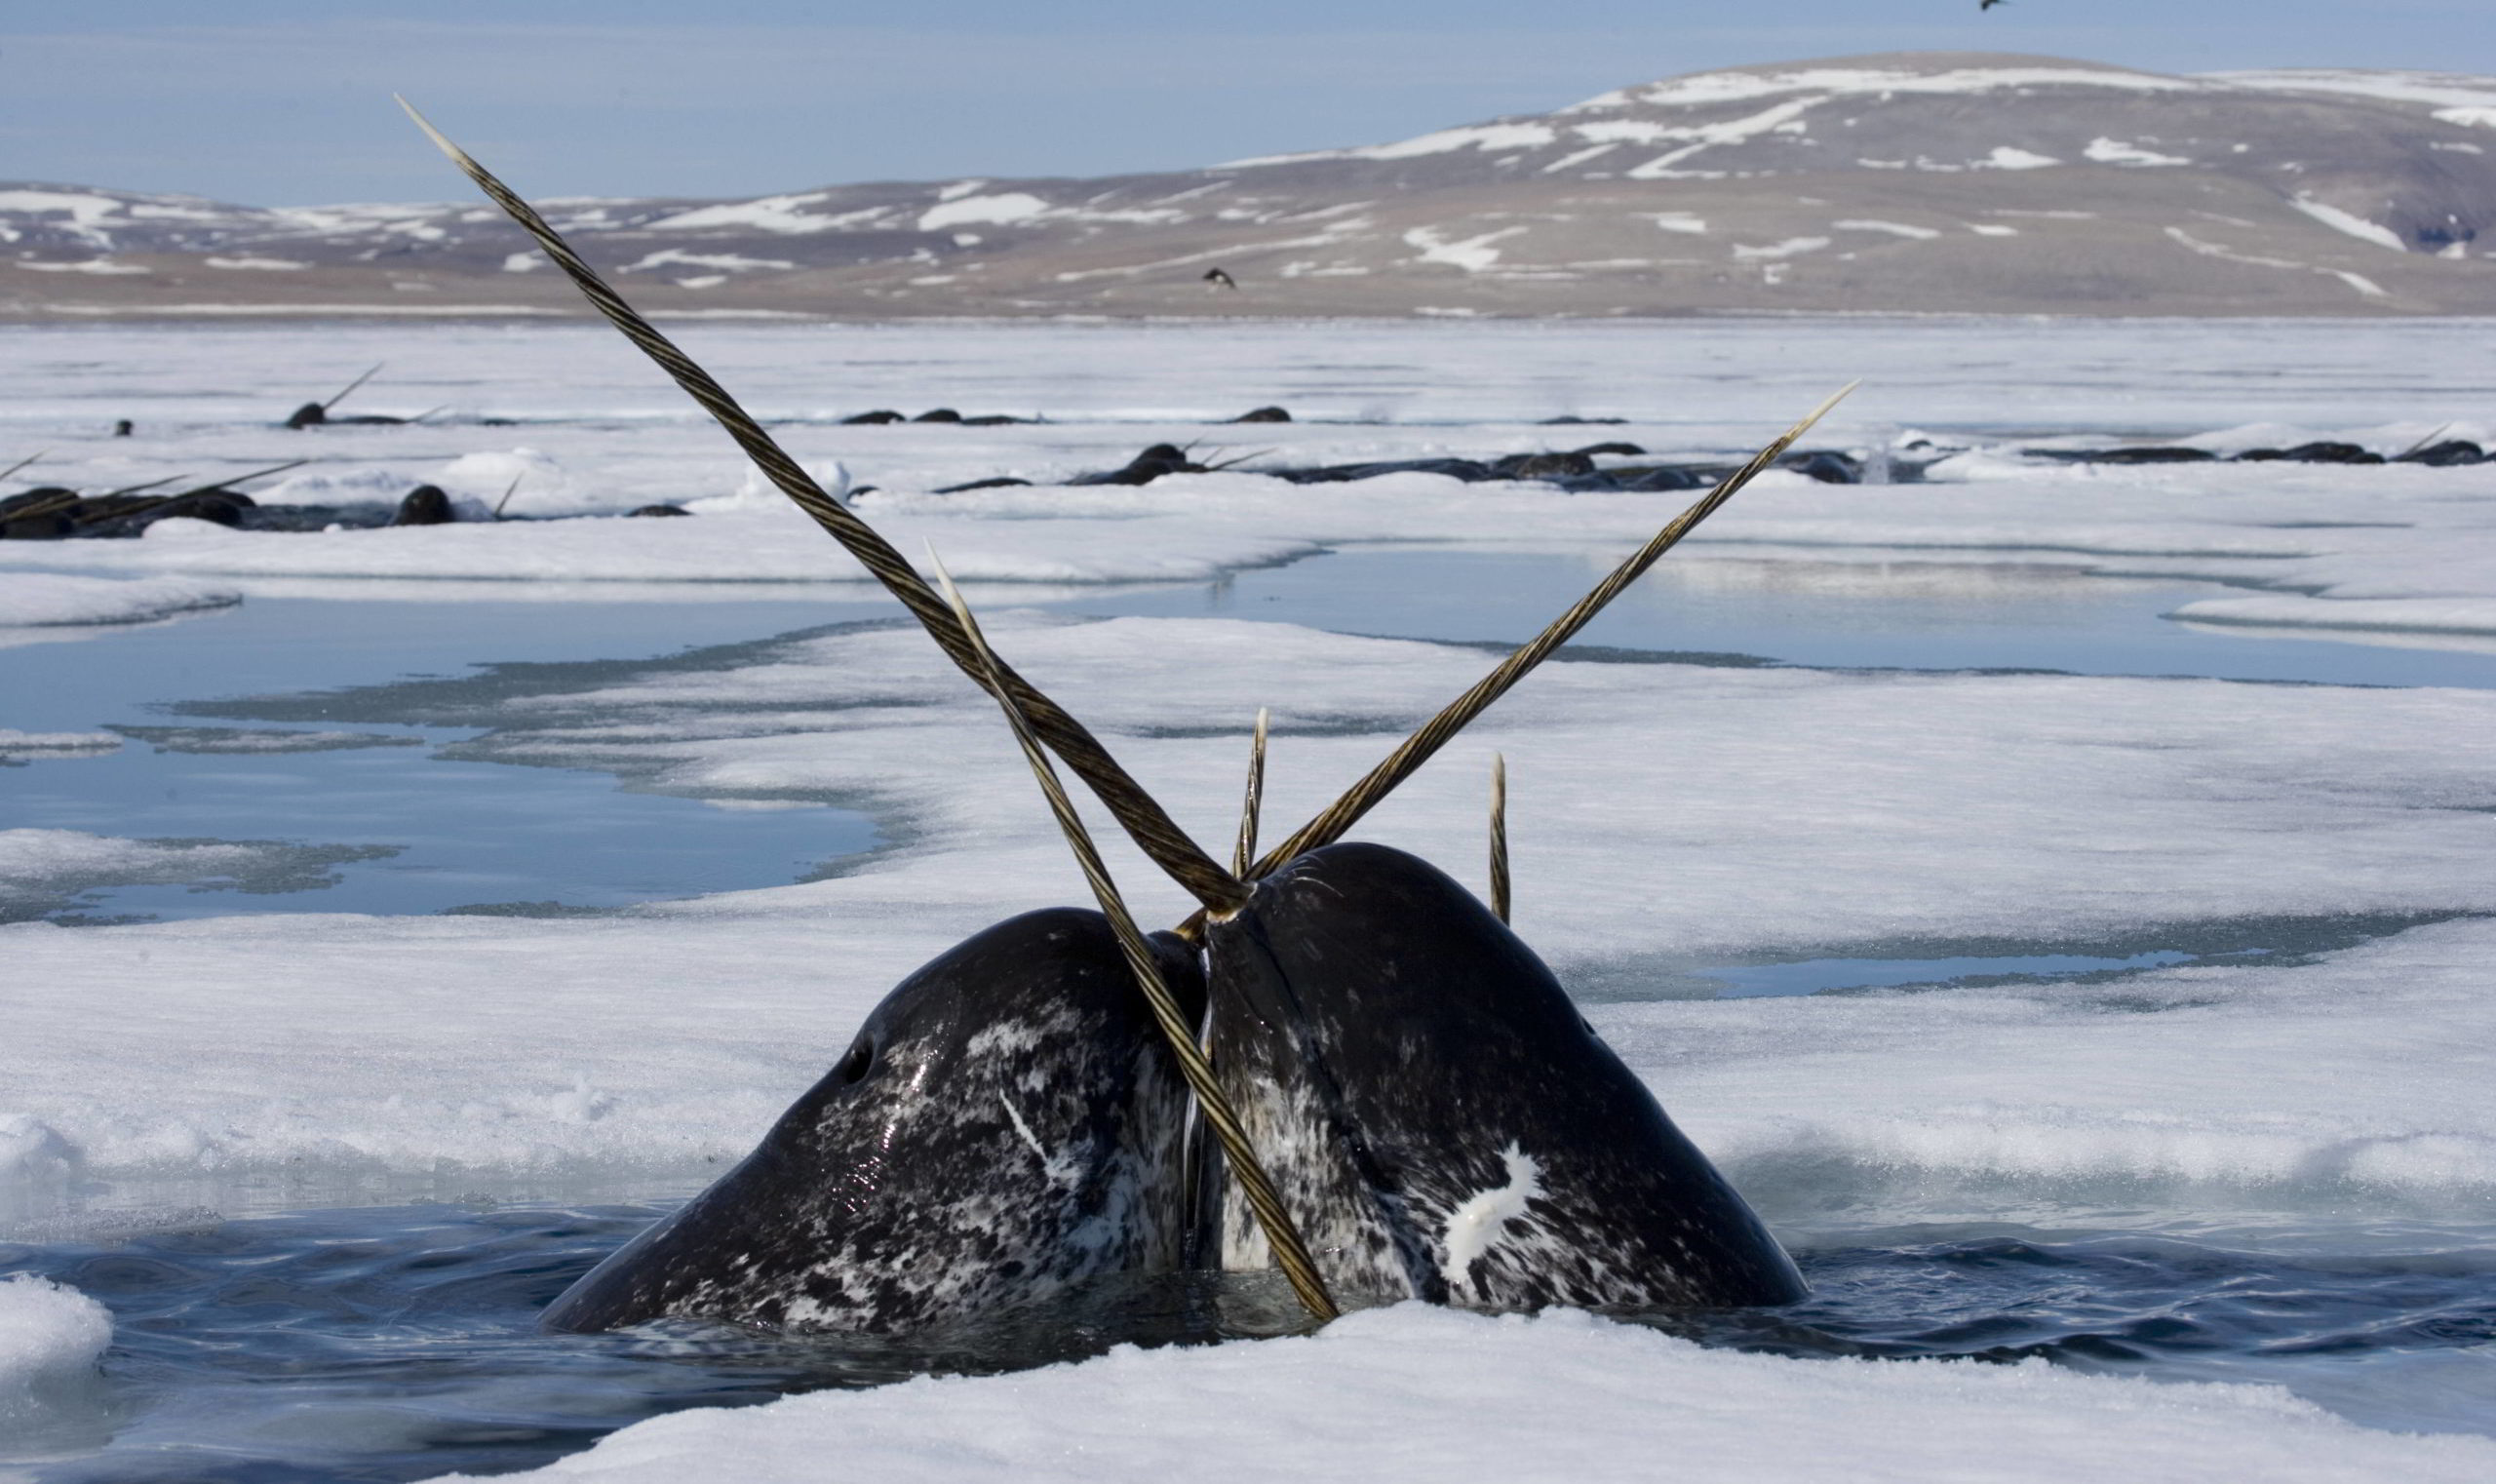 Narbert the Narwhal's North Pole Neighbors (Singe